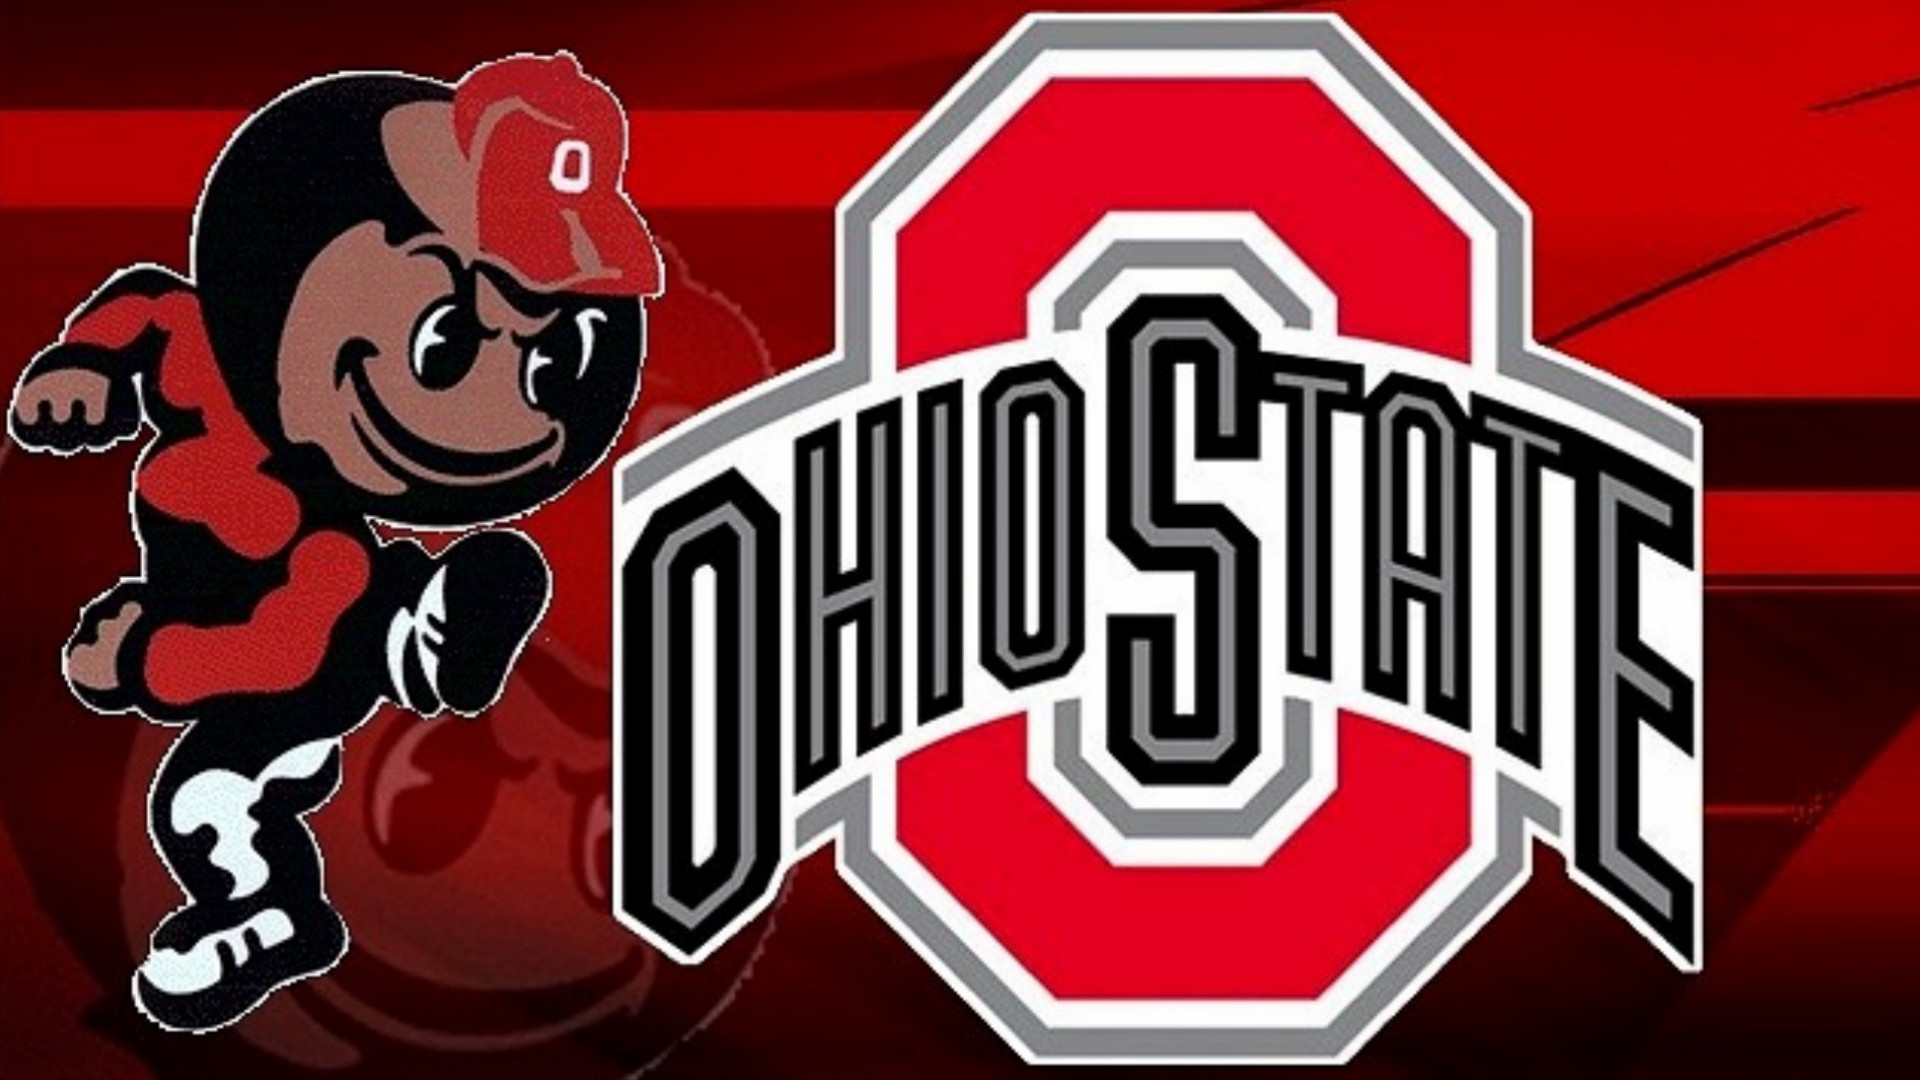 1920x1080 Luxury Ohio State Football Logo Pictures 15 With Additional Simple Logos  with Ohio State Football Logo Pictures